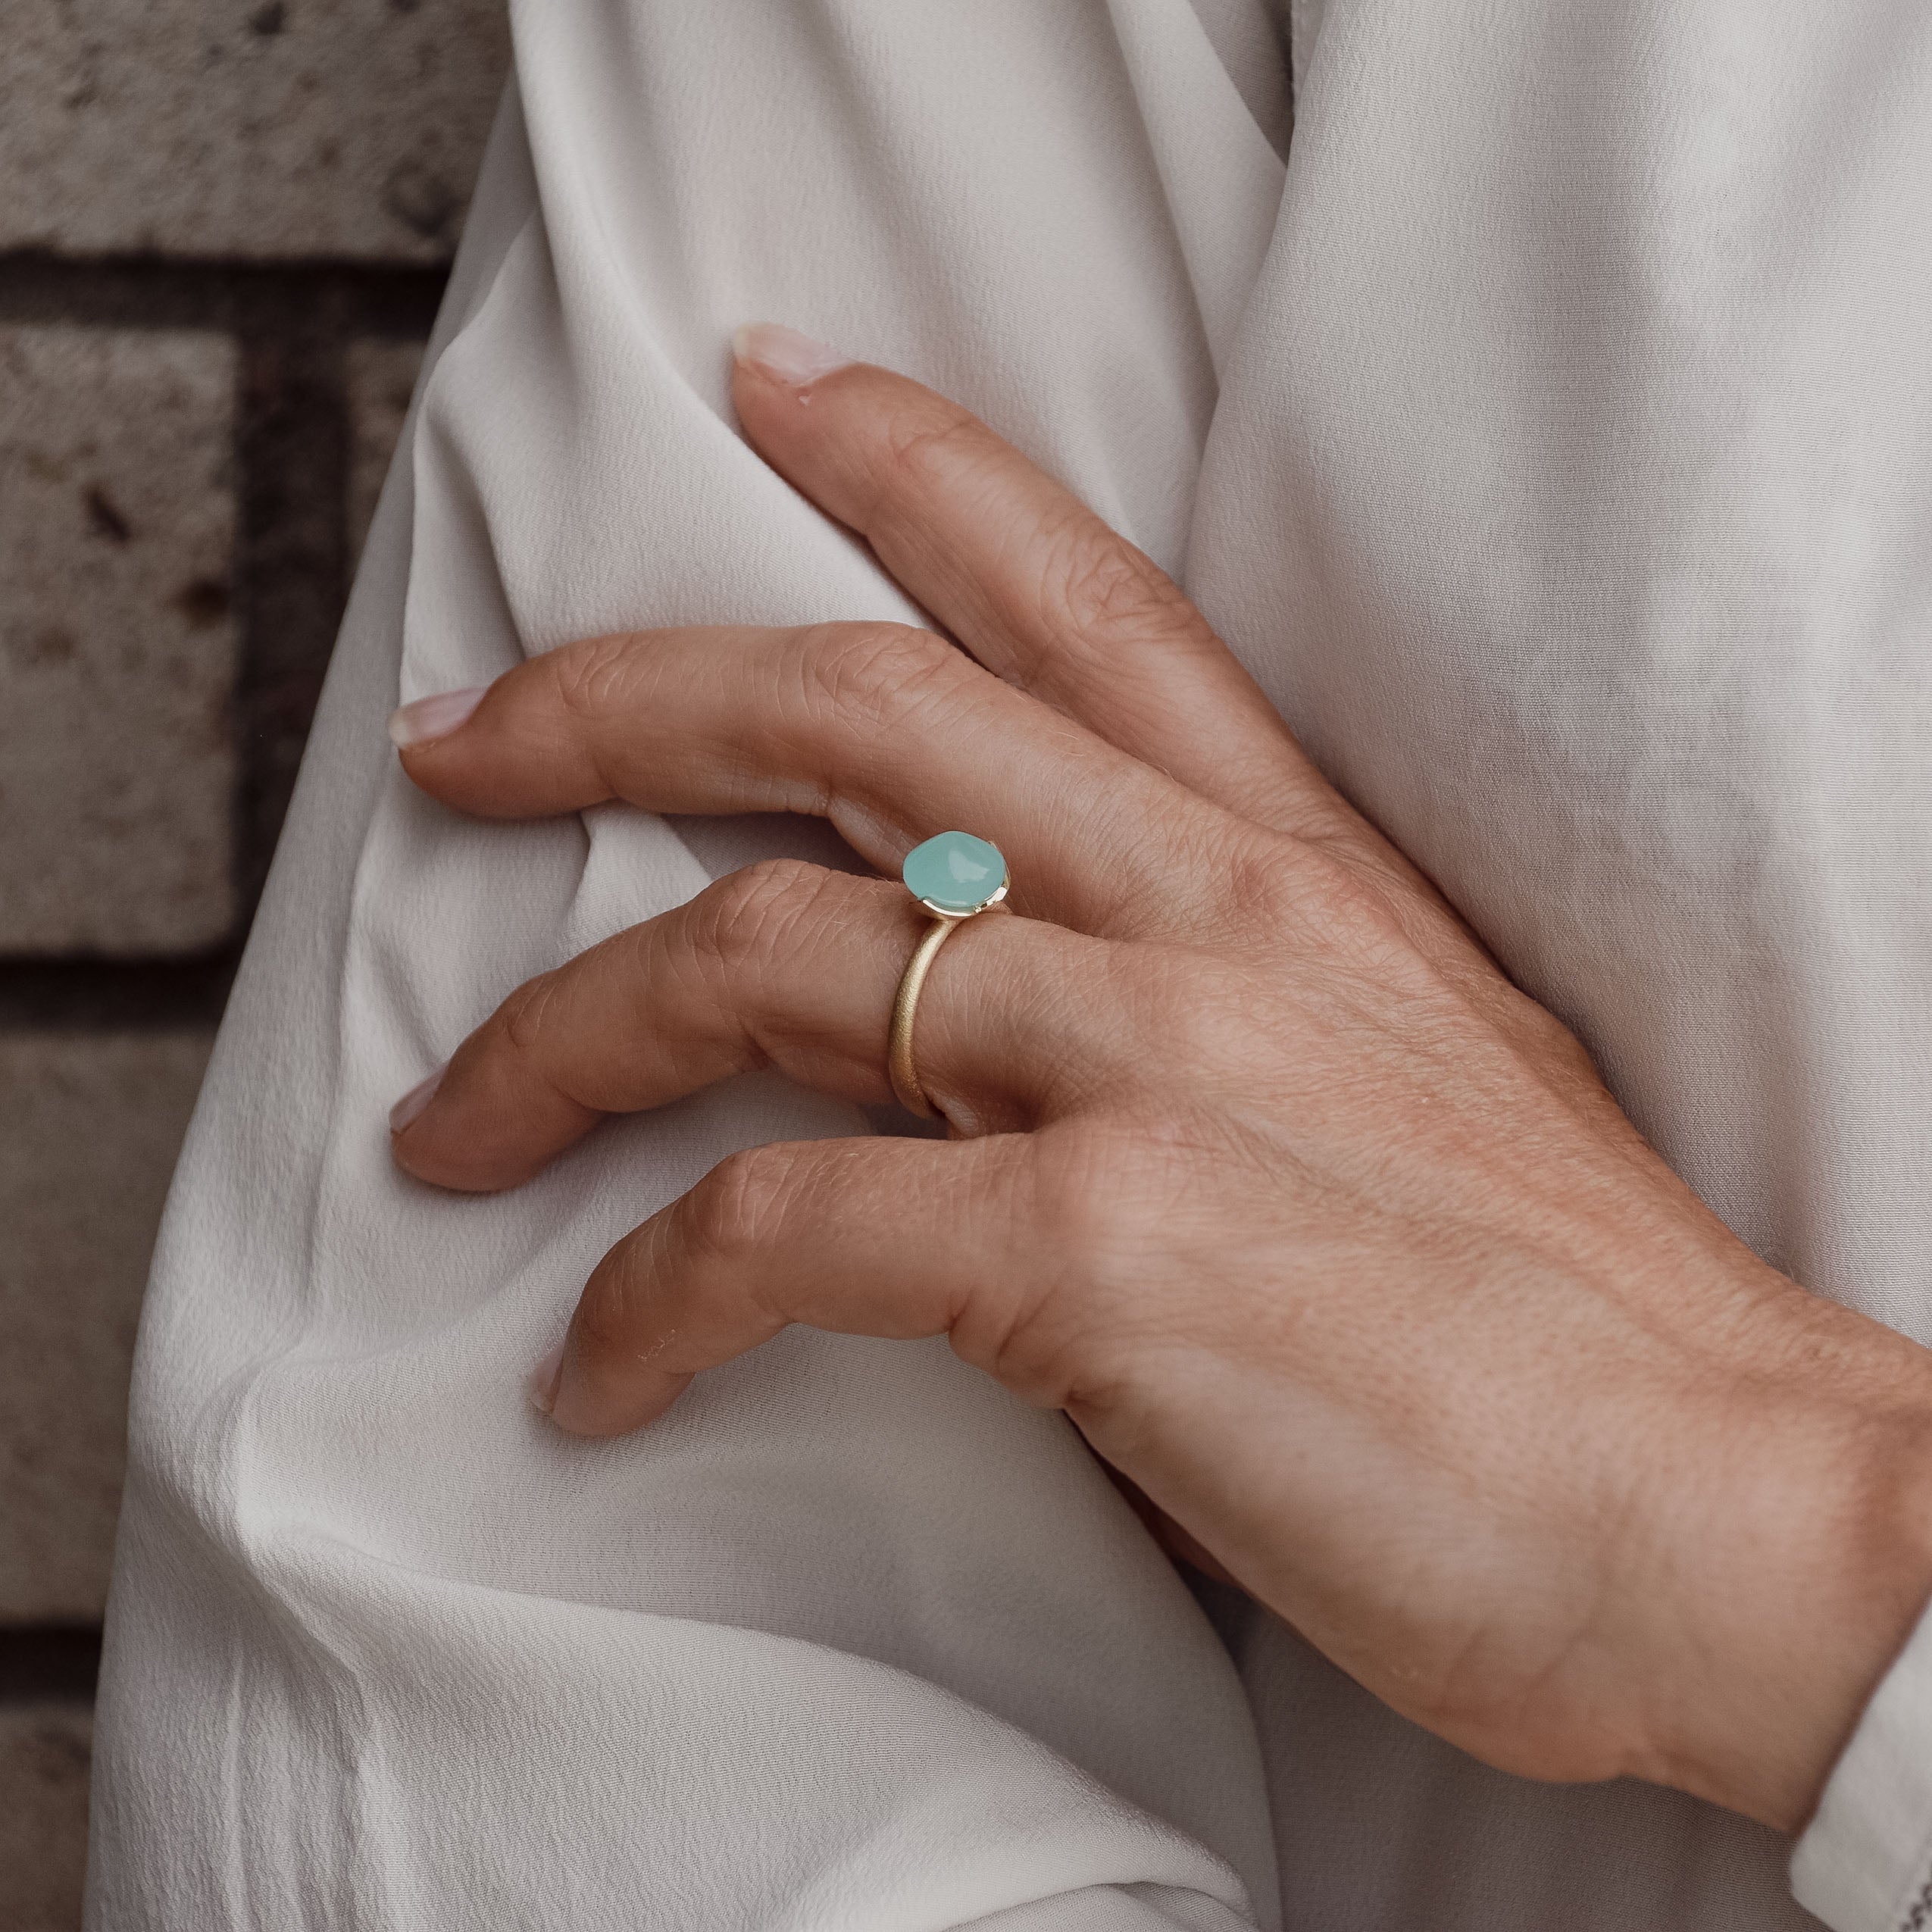 Dolce ring "smal" with chalcedony rec. 925/-